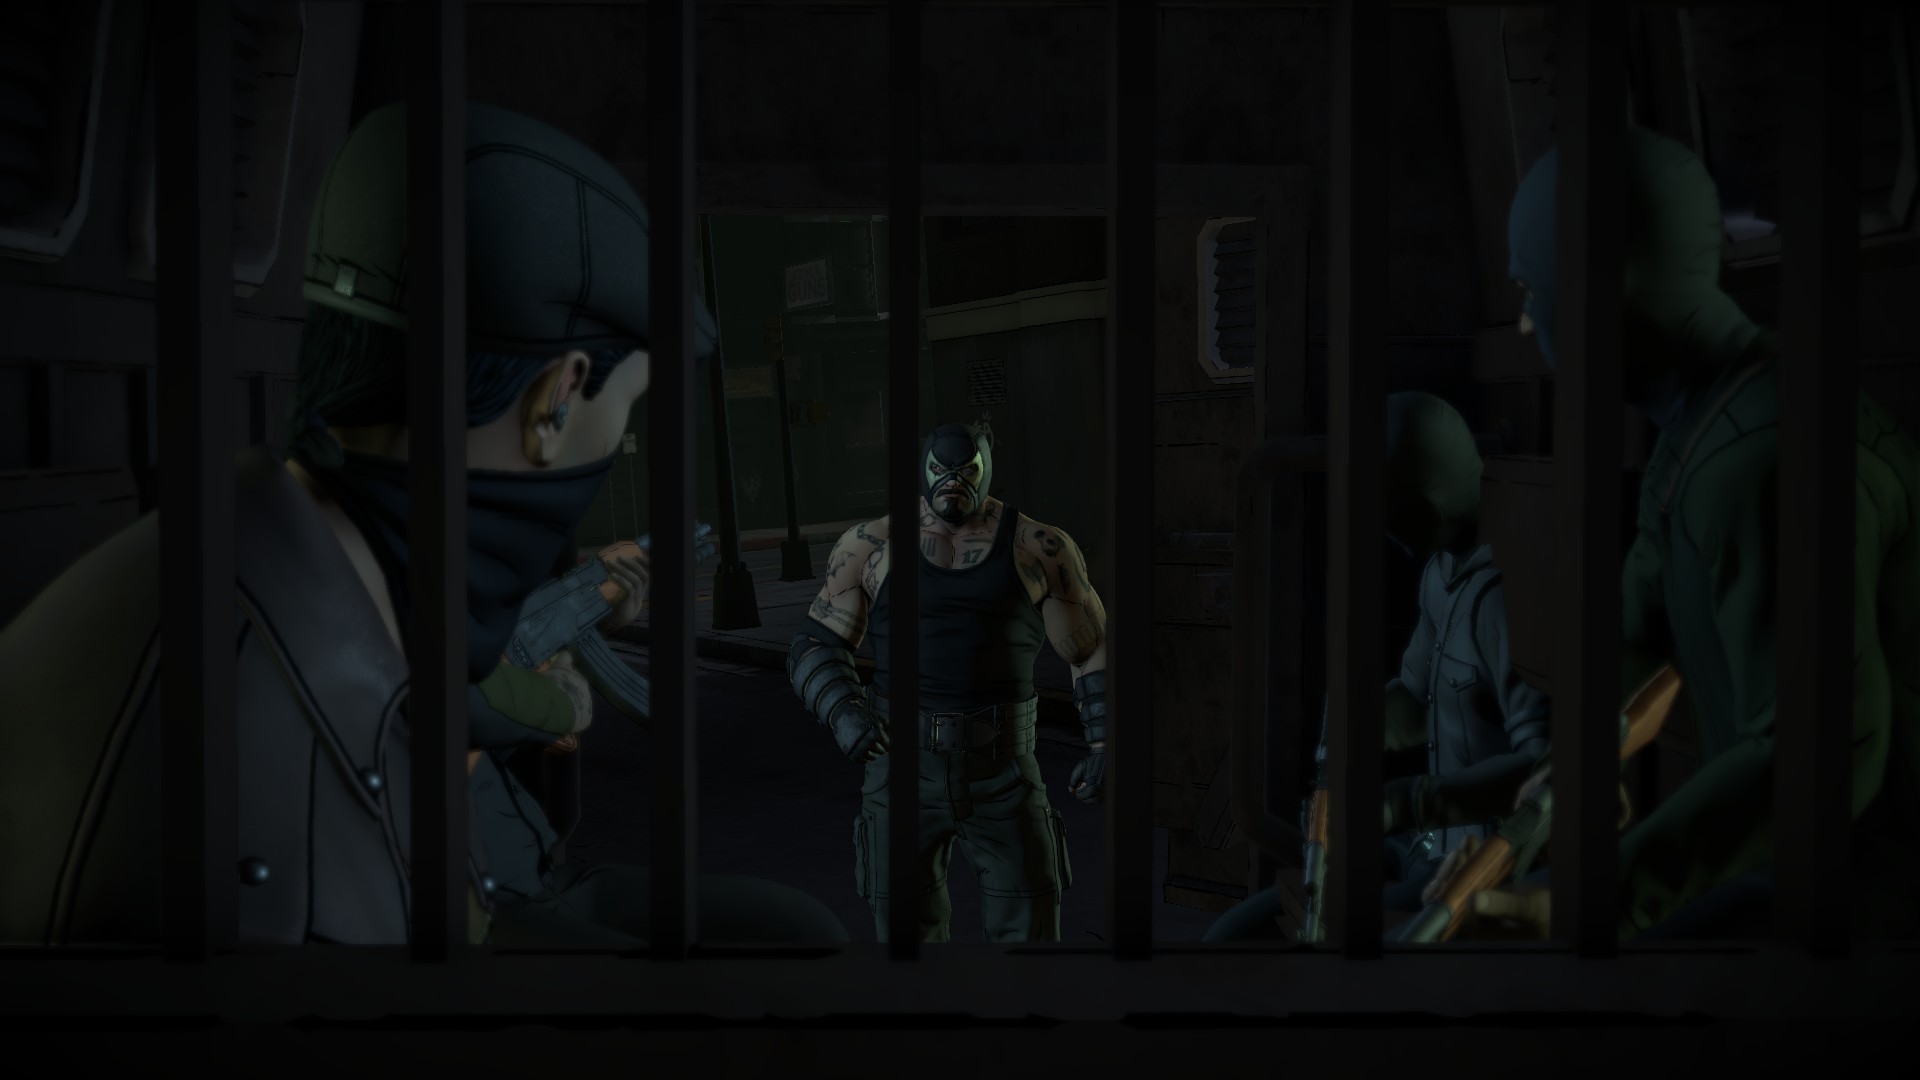 batman the enemy within the telltale series download free